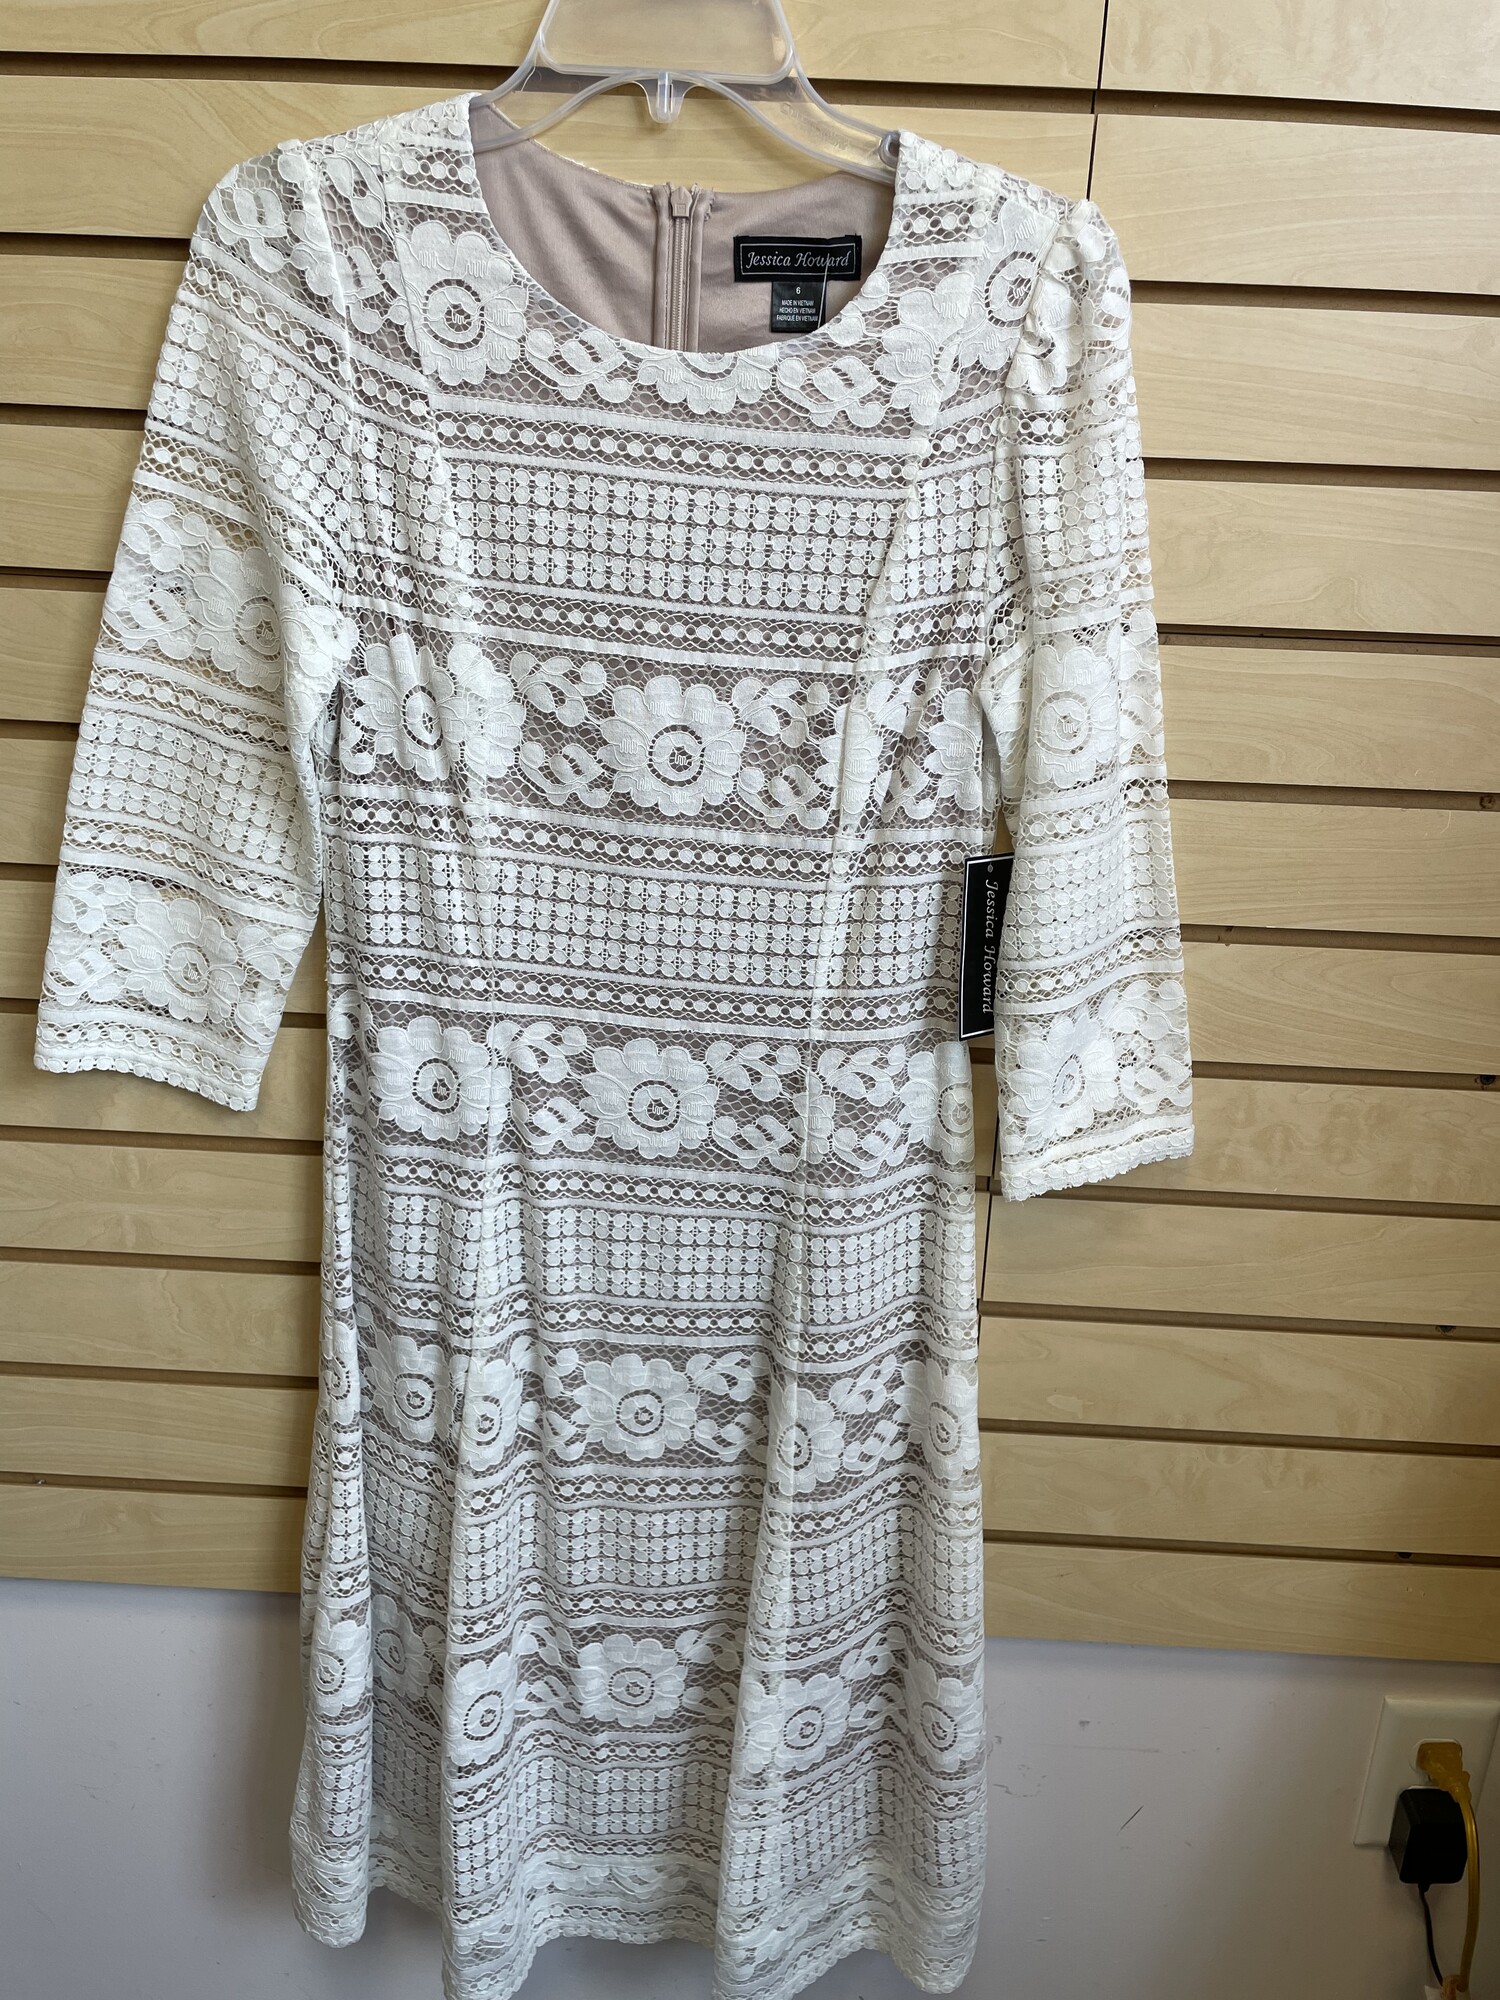 NWT Jessica Howard Dress, 3/4 Sleeves, Cream Lace Overlaying a Beige Tank Dress, Zippered Back, Size: Small